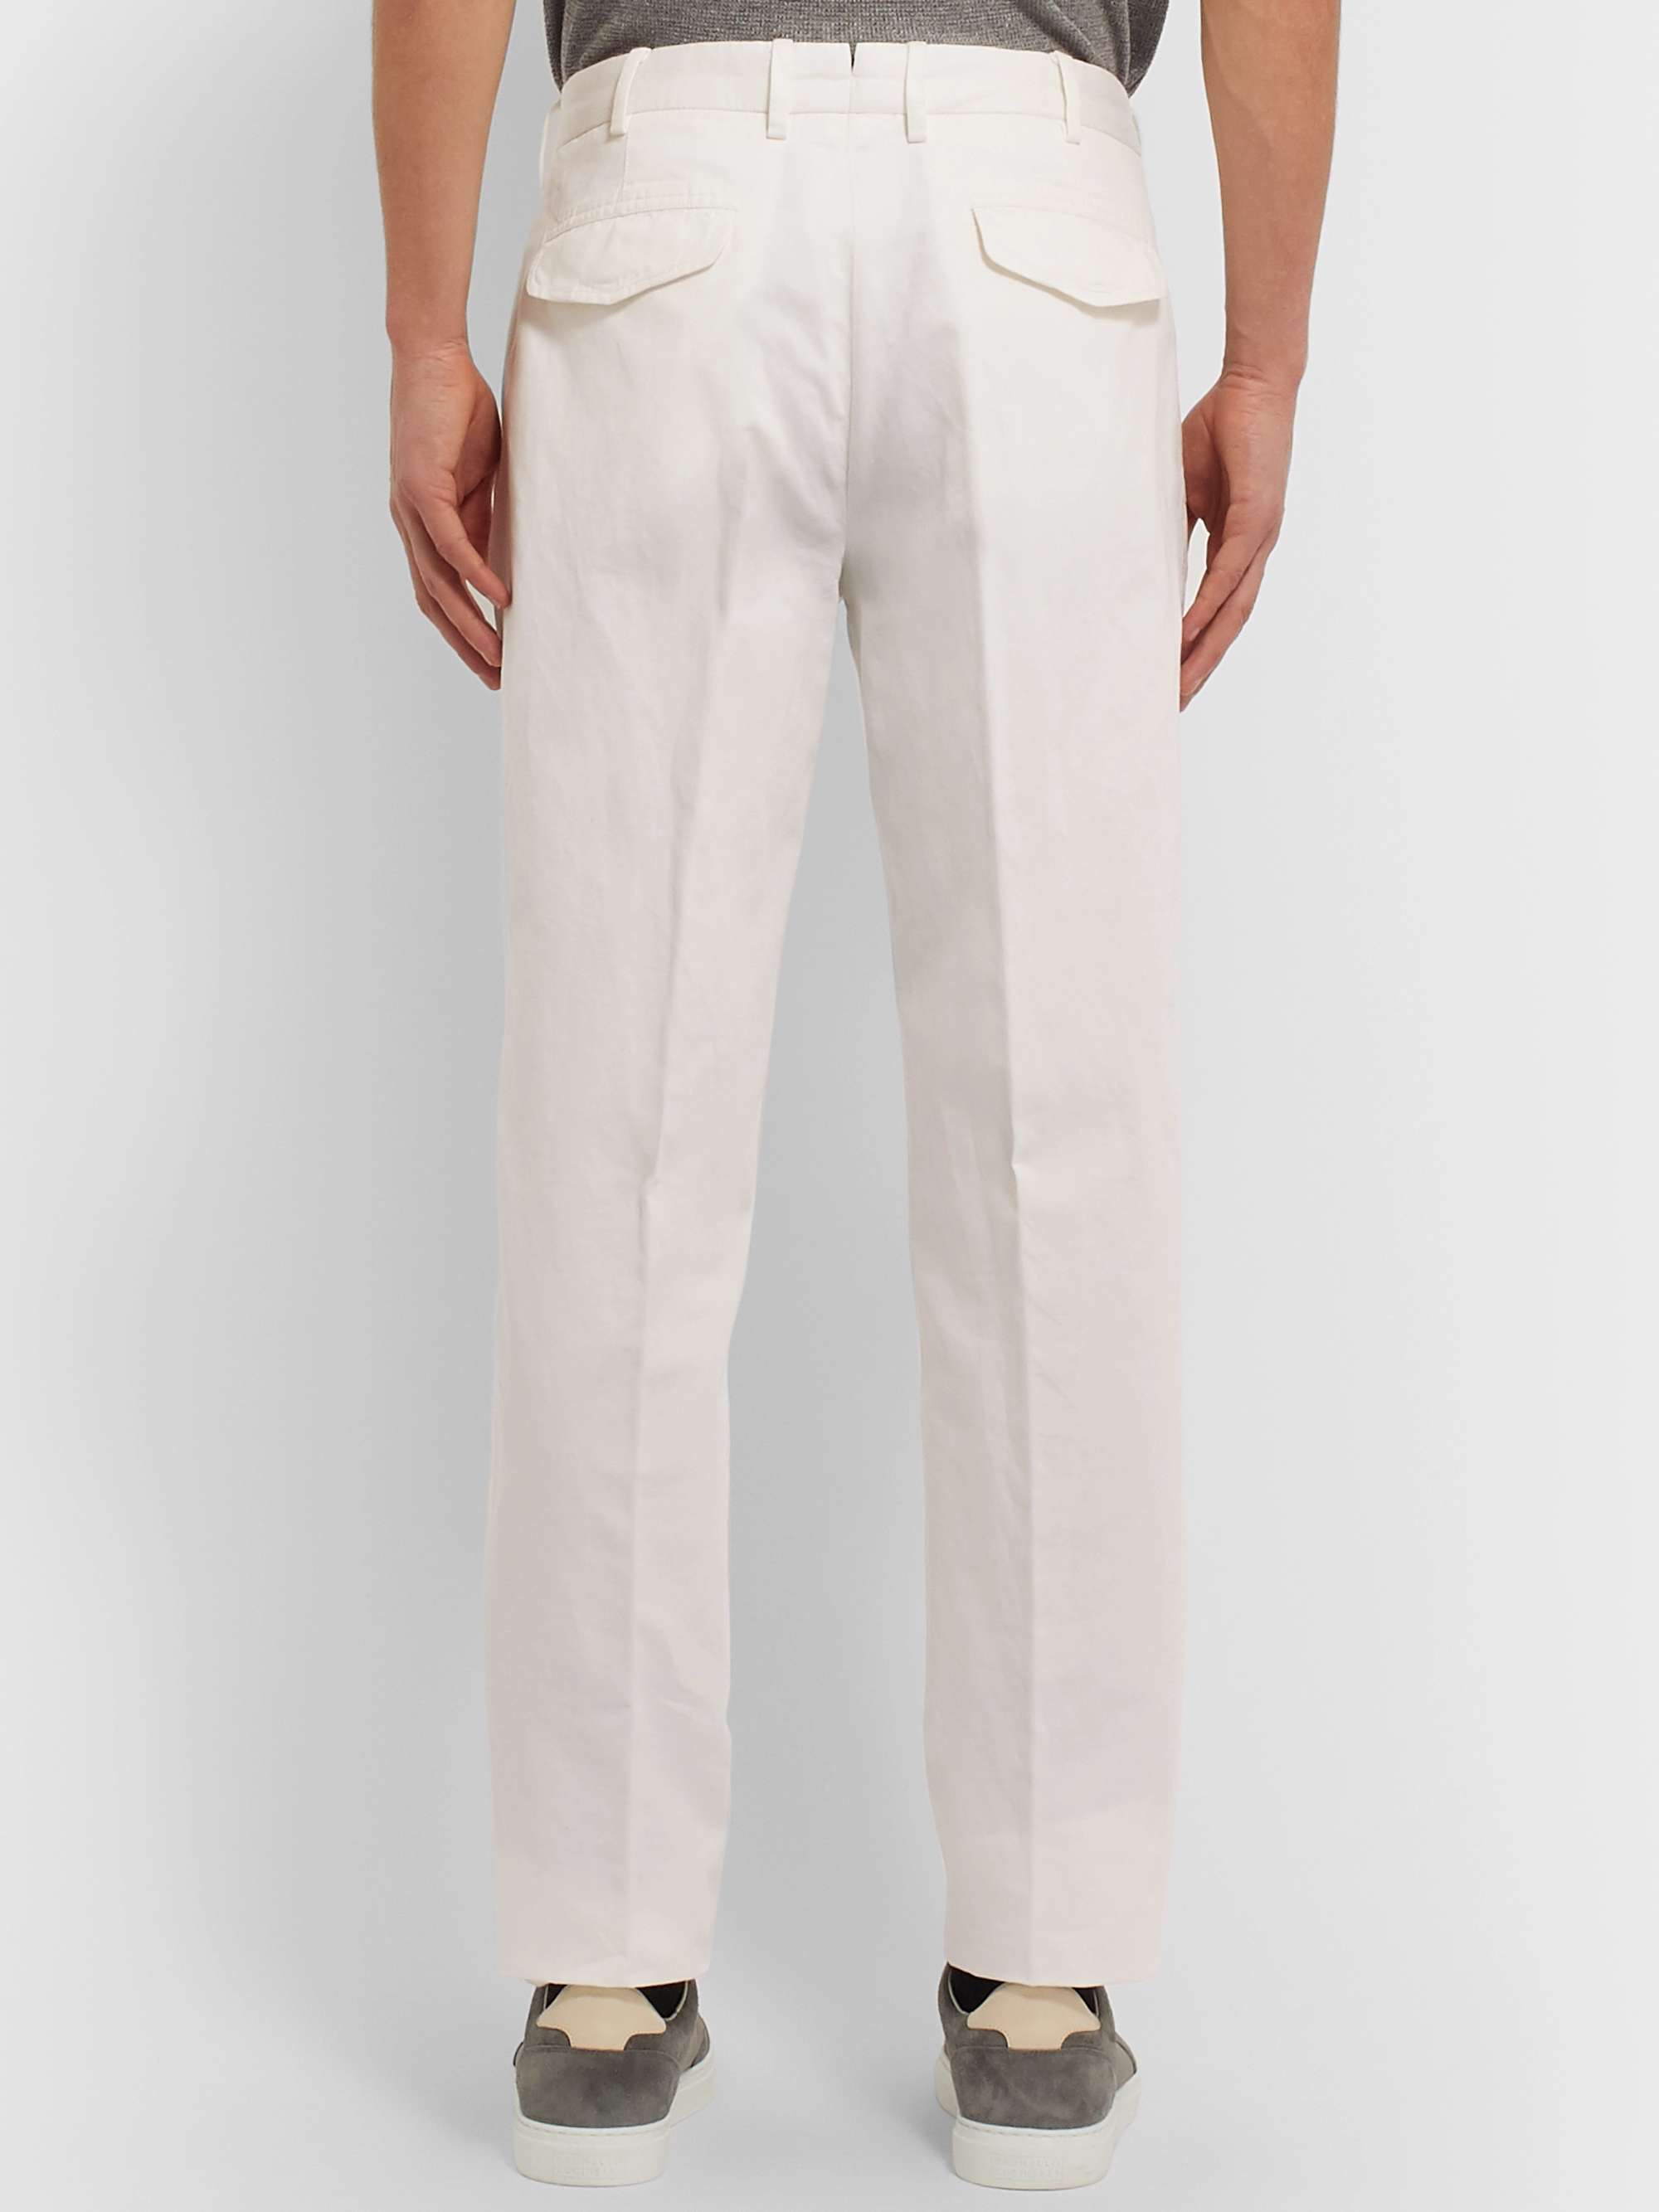 ZEGNA Cotton and Linen-Blend Trousers